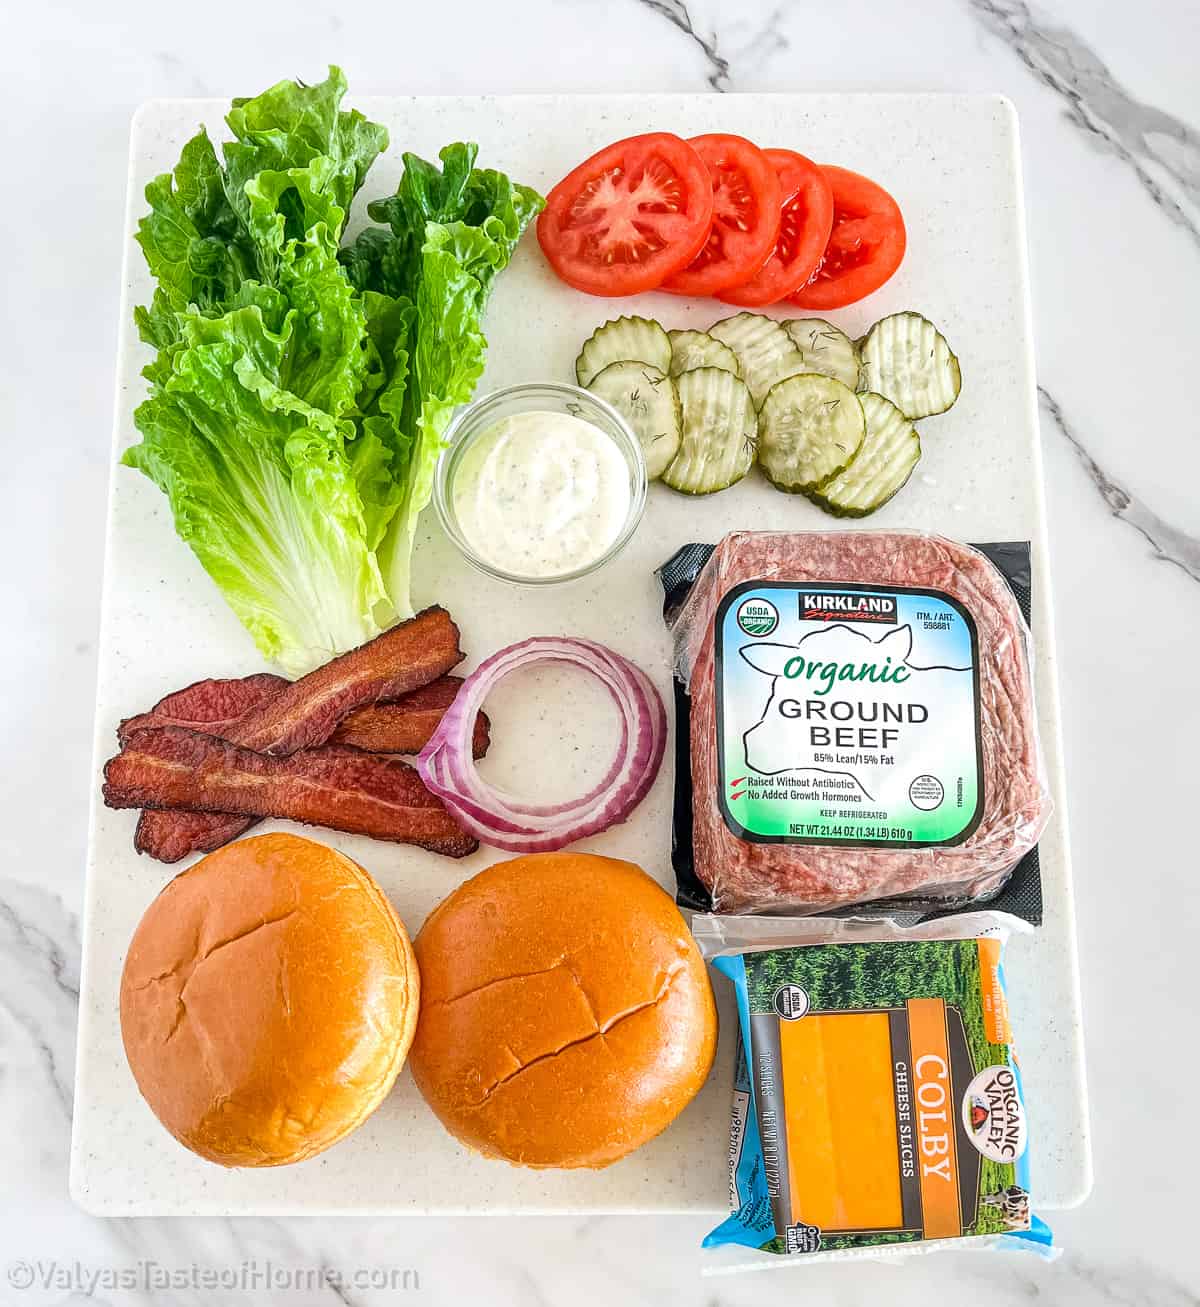 All you need are some simple ingredients to make the tastiest bacon cheeseburger you've ever had!